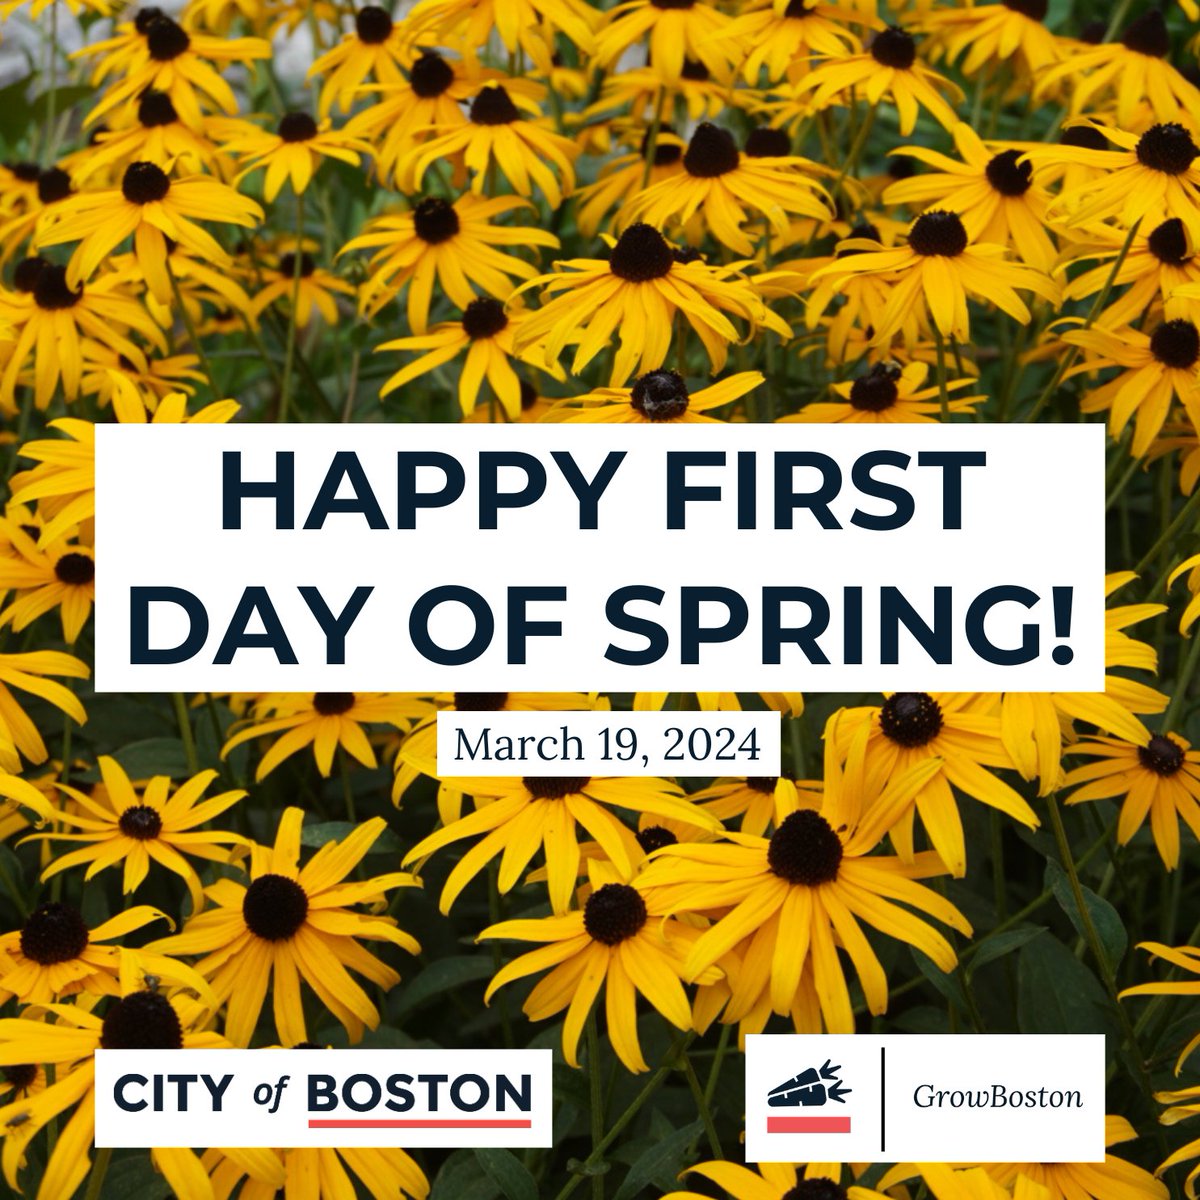 Happy first day of Spring from GrowBoston!
.
.
.
#growboston #urbanagriculture #firstdayofspring #spring #spring2024